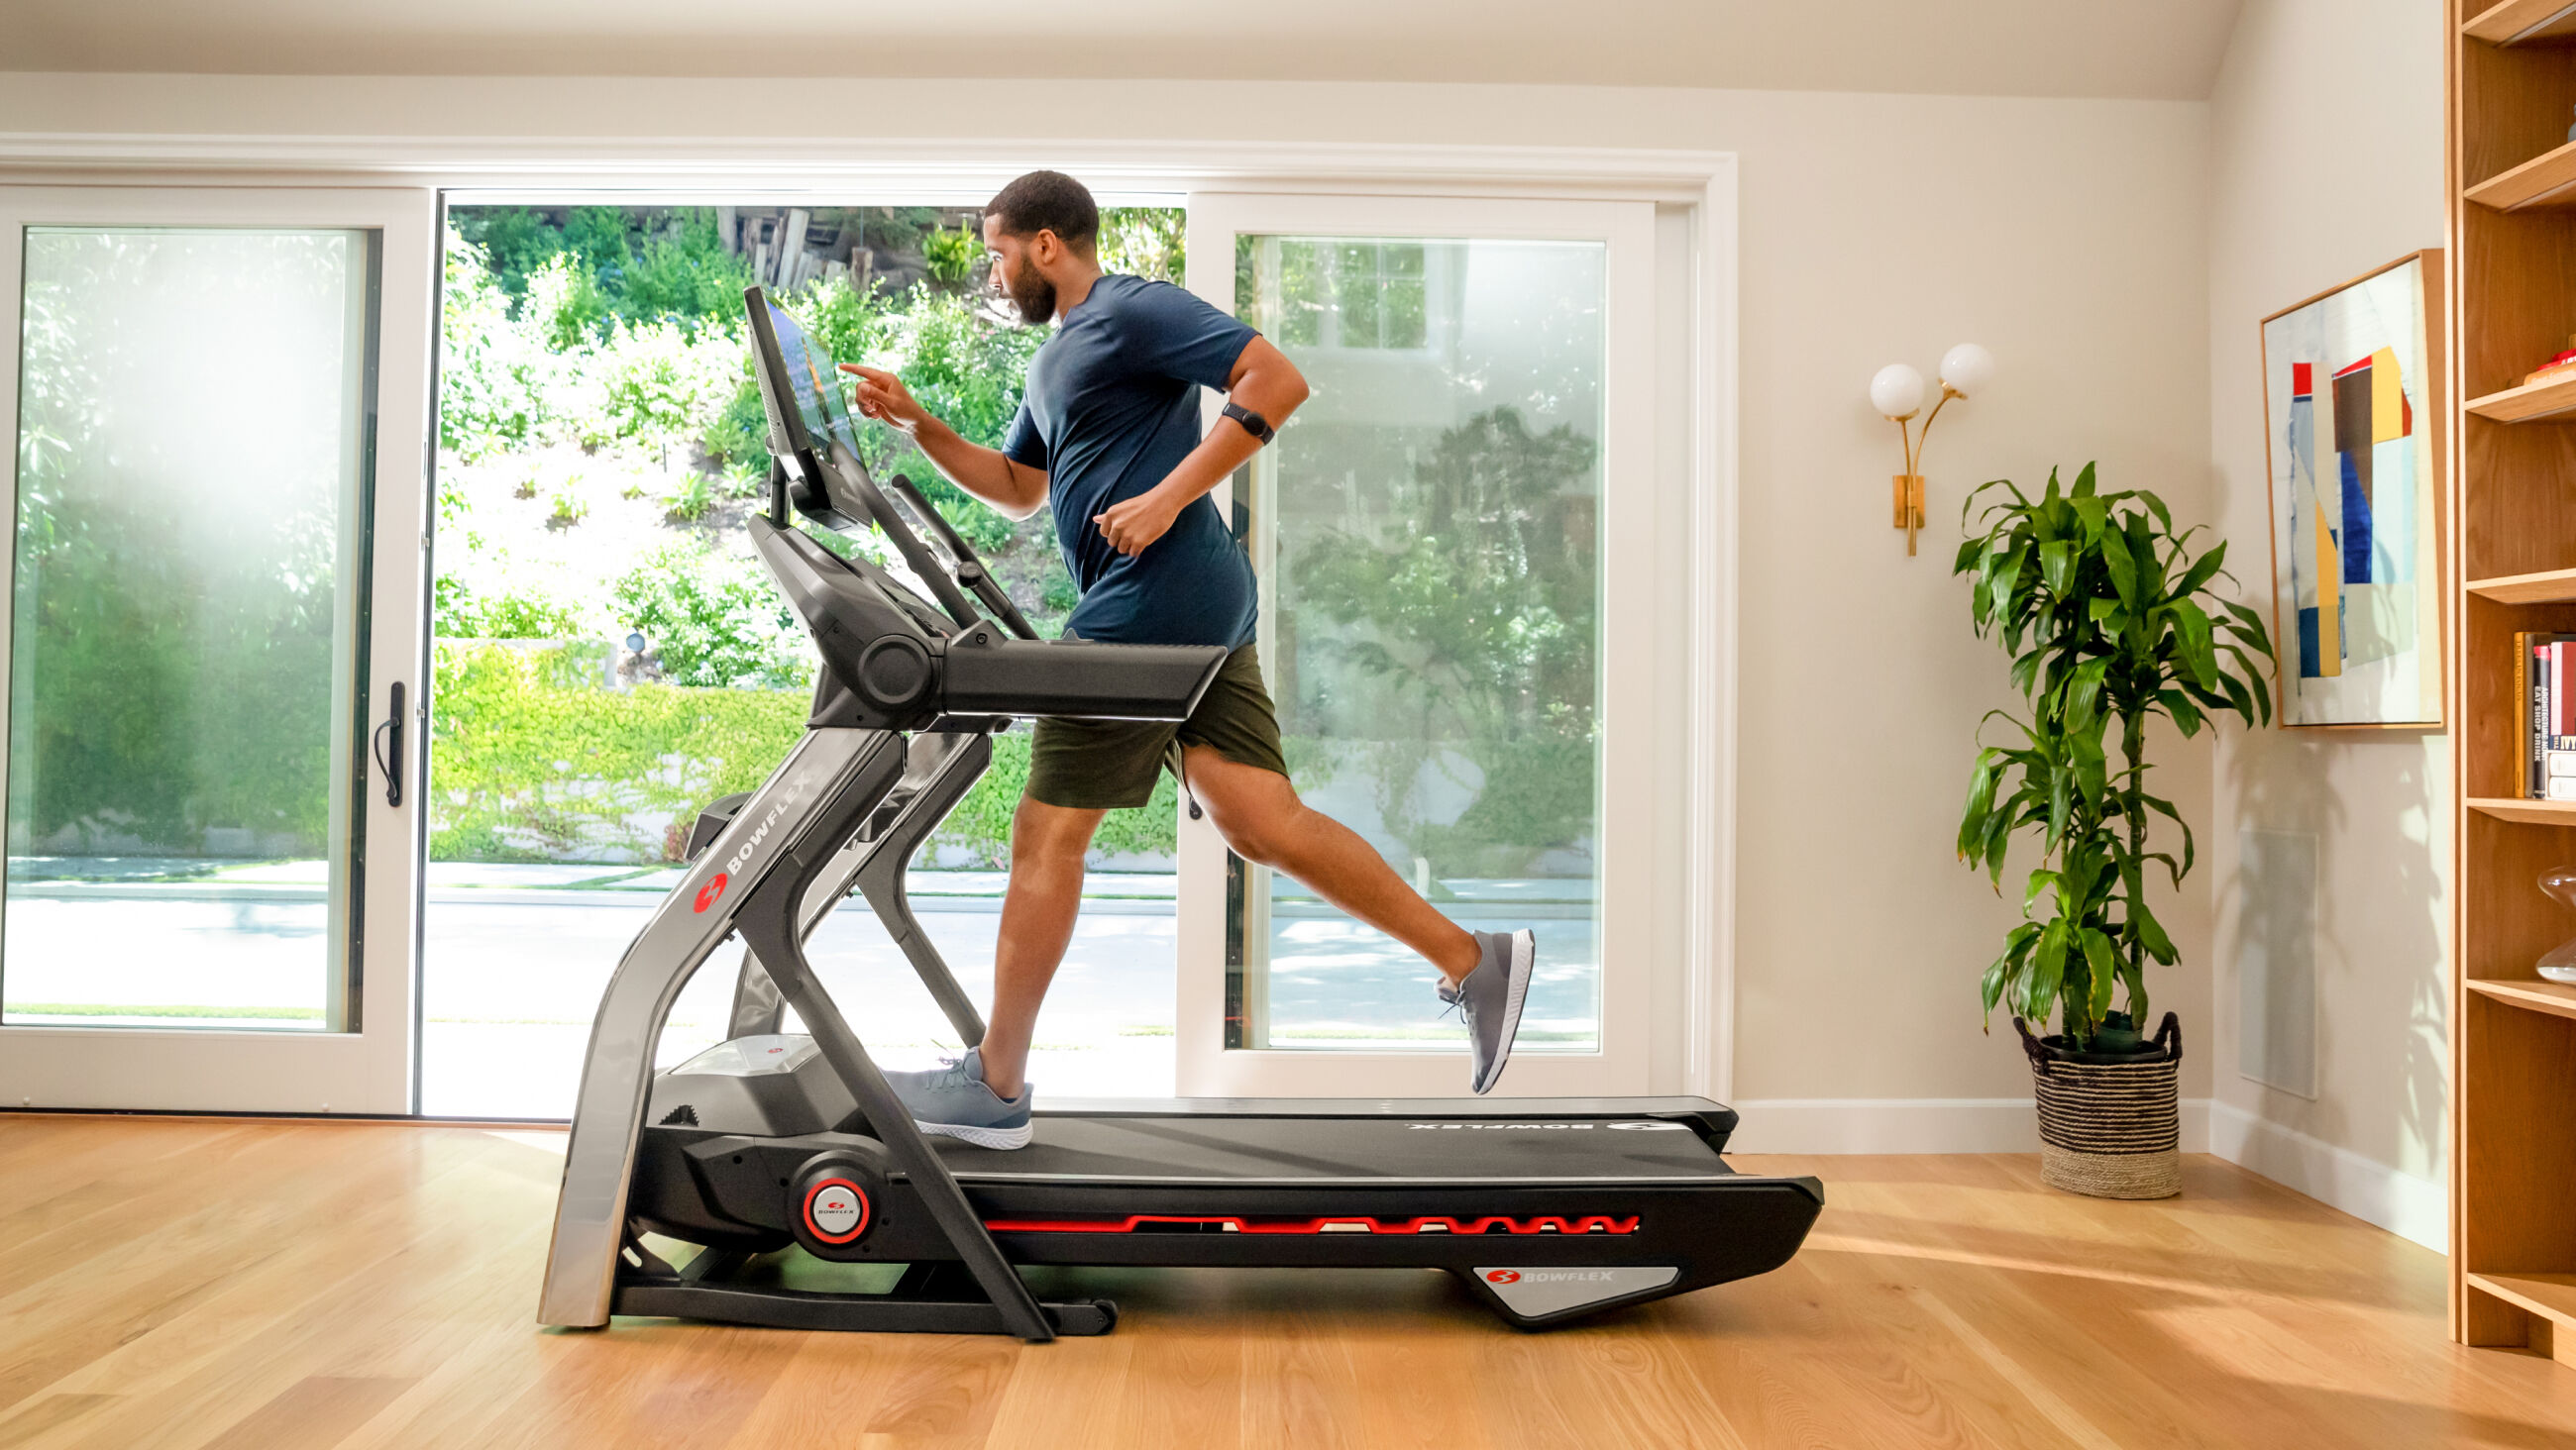 Treadmill 22 - Our Best In Home Treadmill